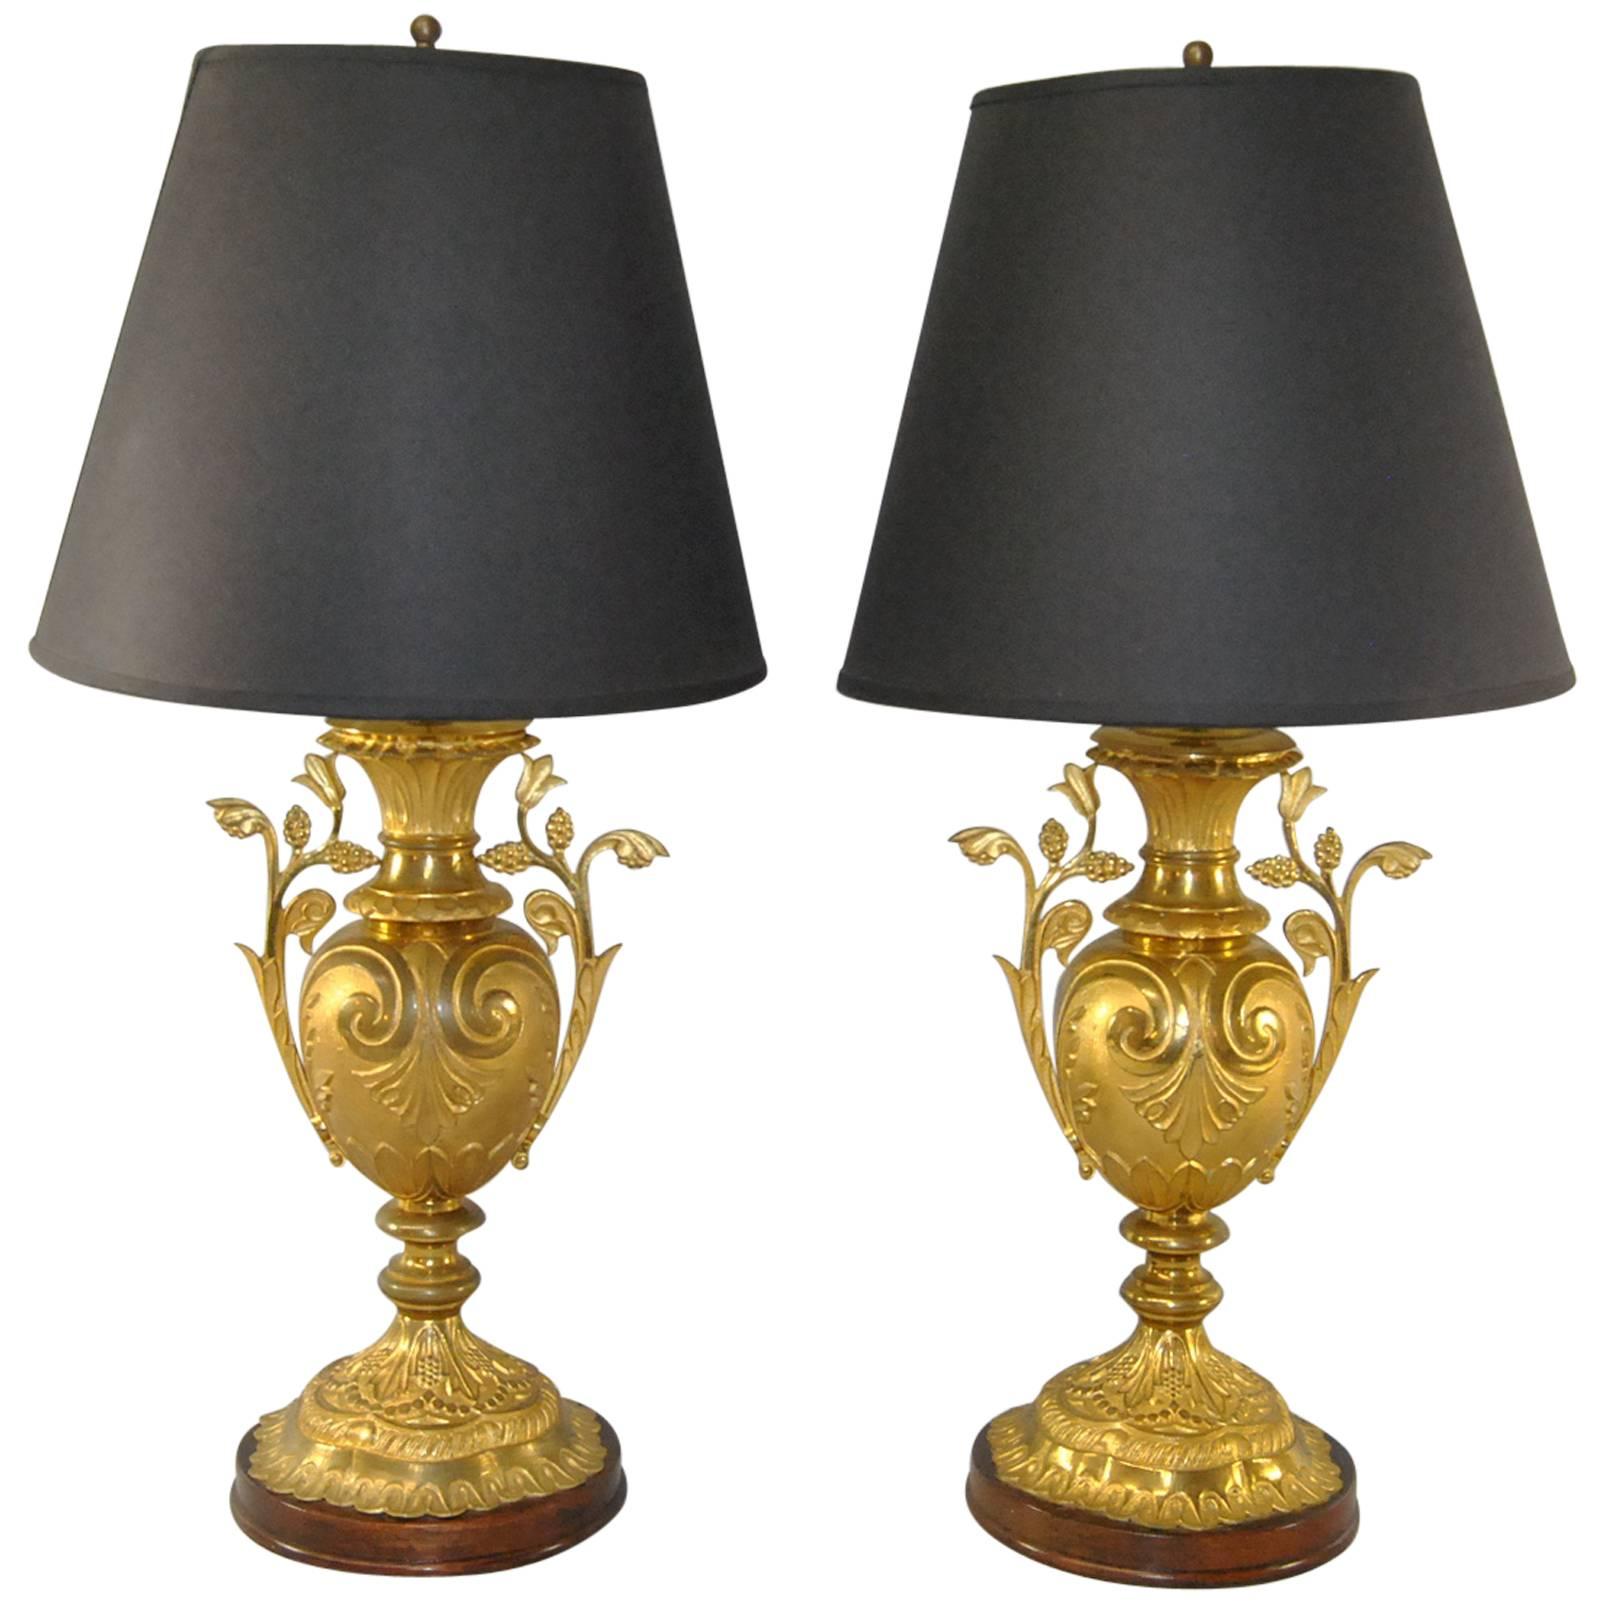 Pair of Turn-of-the-Century French Brass Vases Fitted for Use as Table Lamps